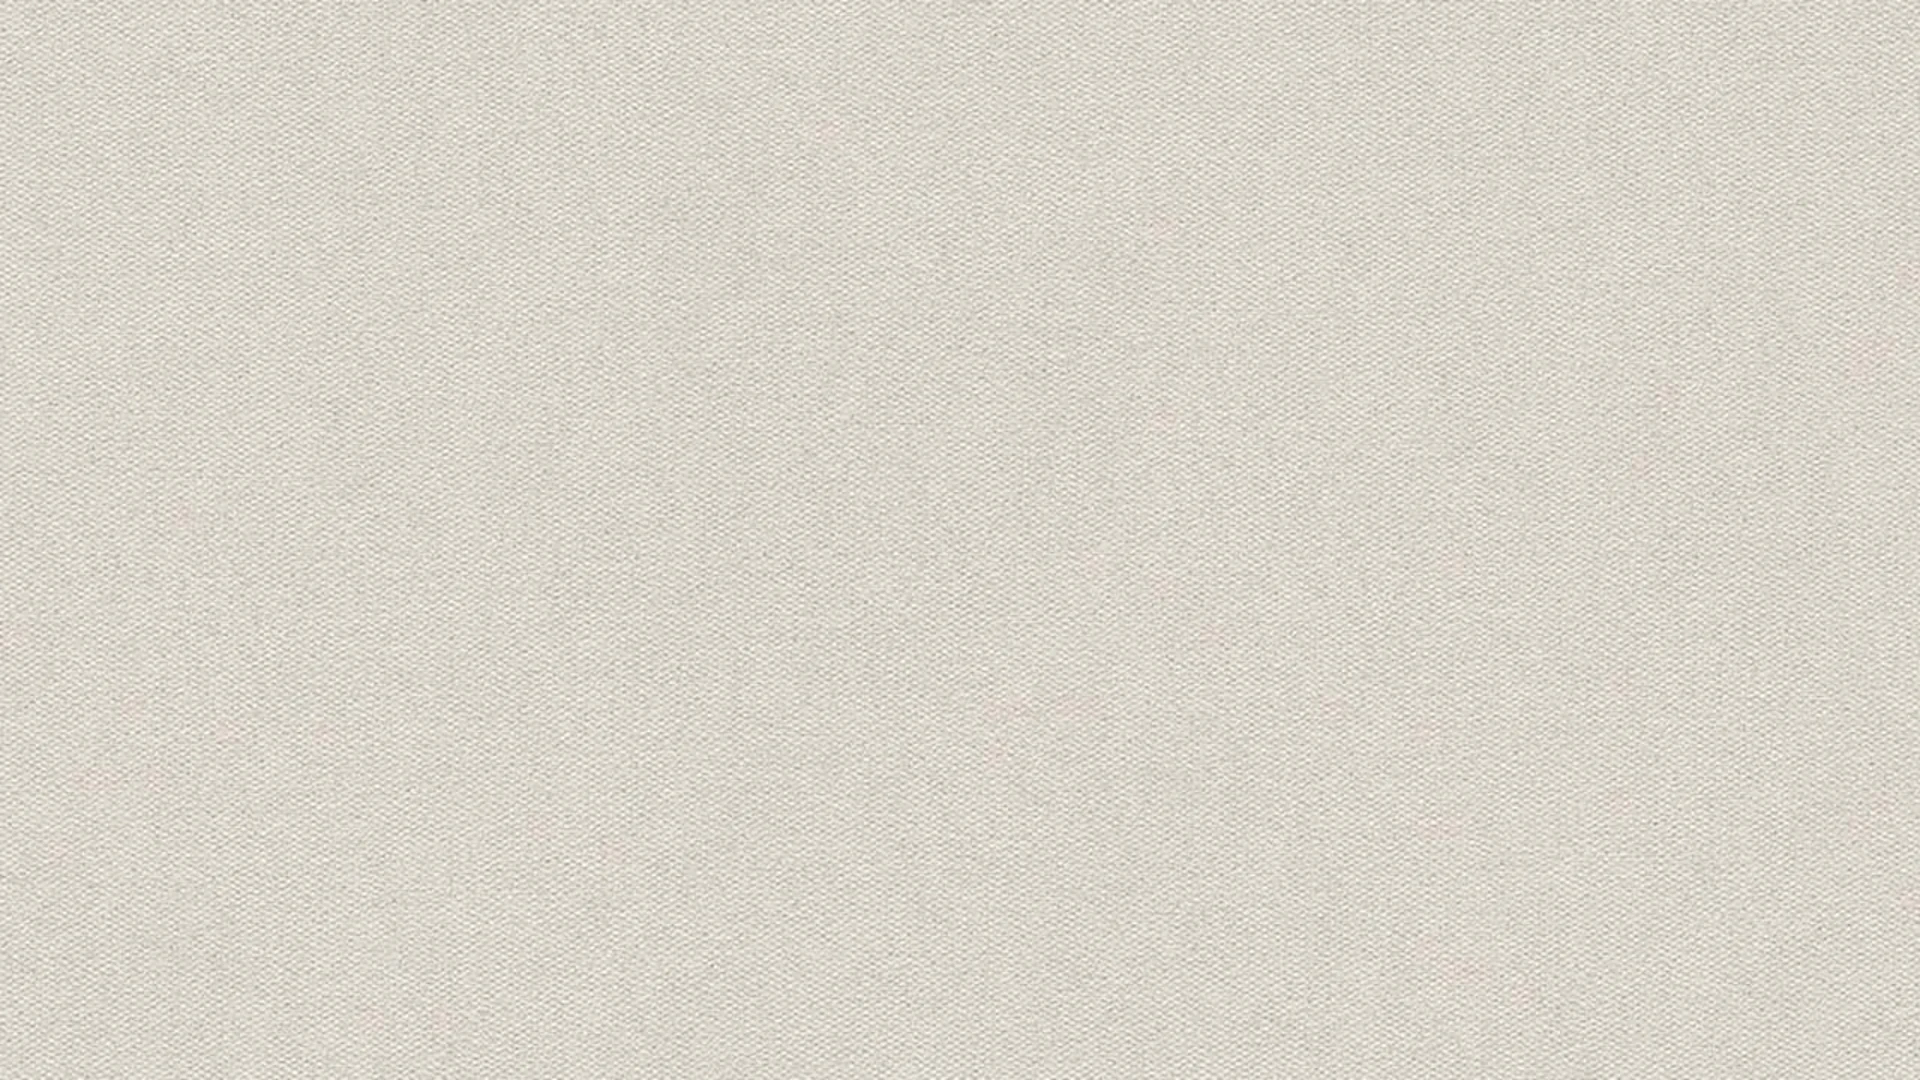 vinyl wallcovering beige classic plains style guide trend colours 2021 847